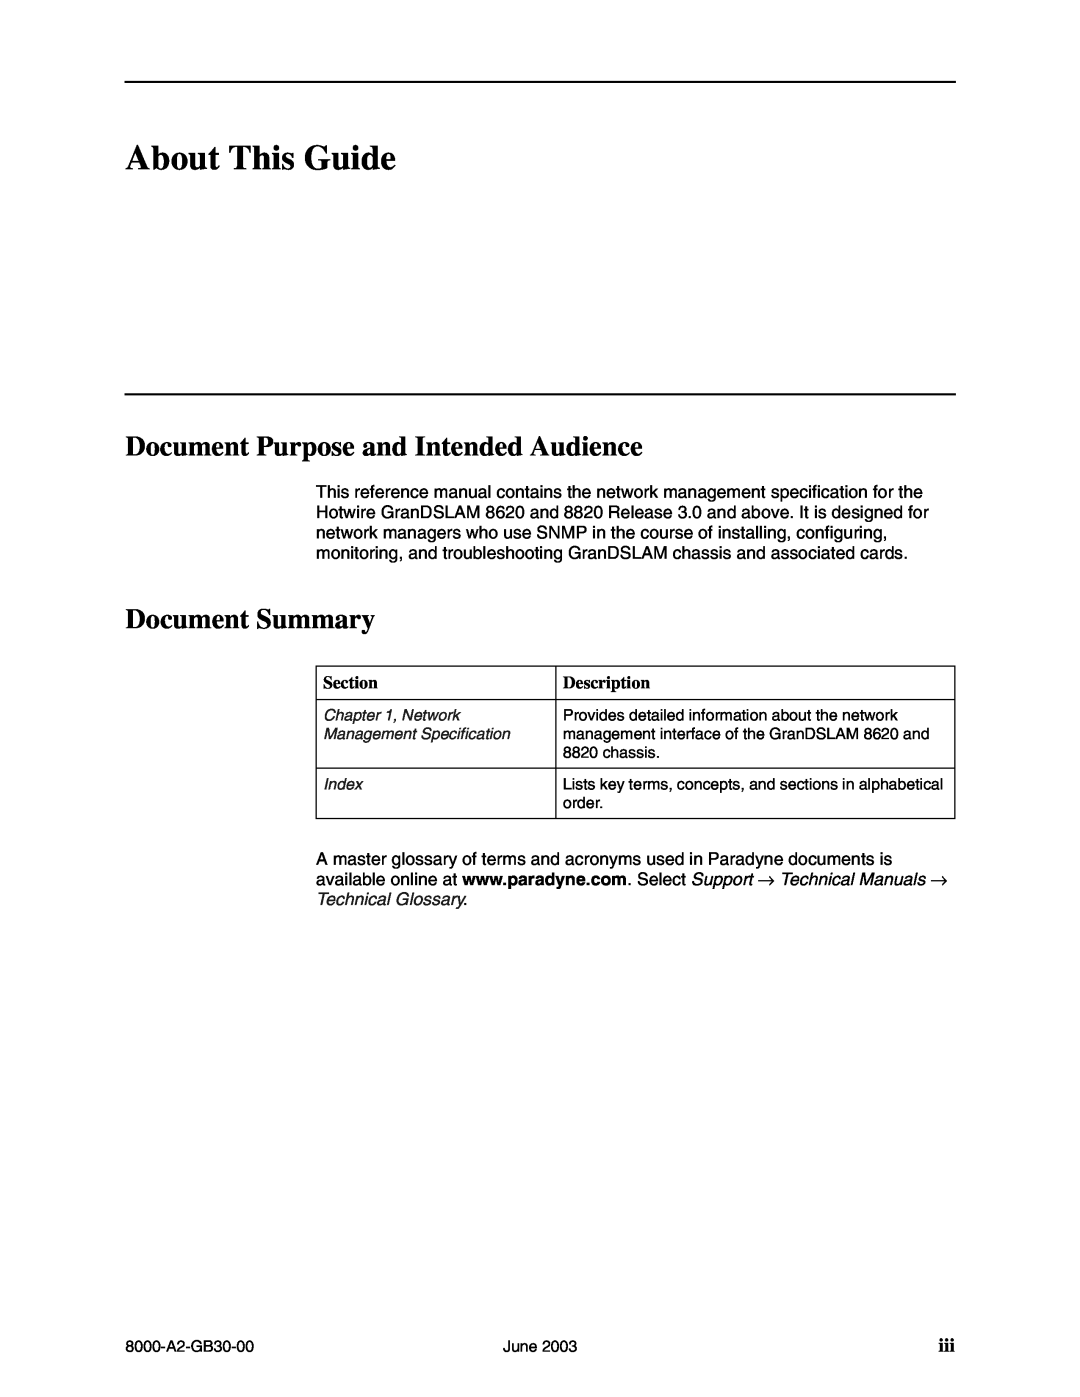 Paradyne 8620, 8820 manual About This Guide, Document Purpose and Intended Audience, Document Summary, Section, Description 